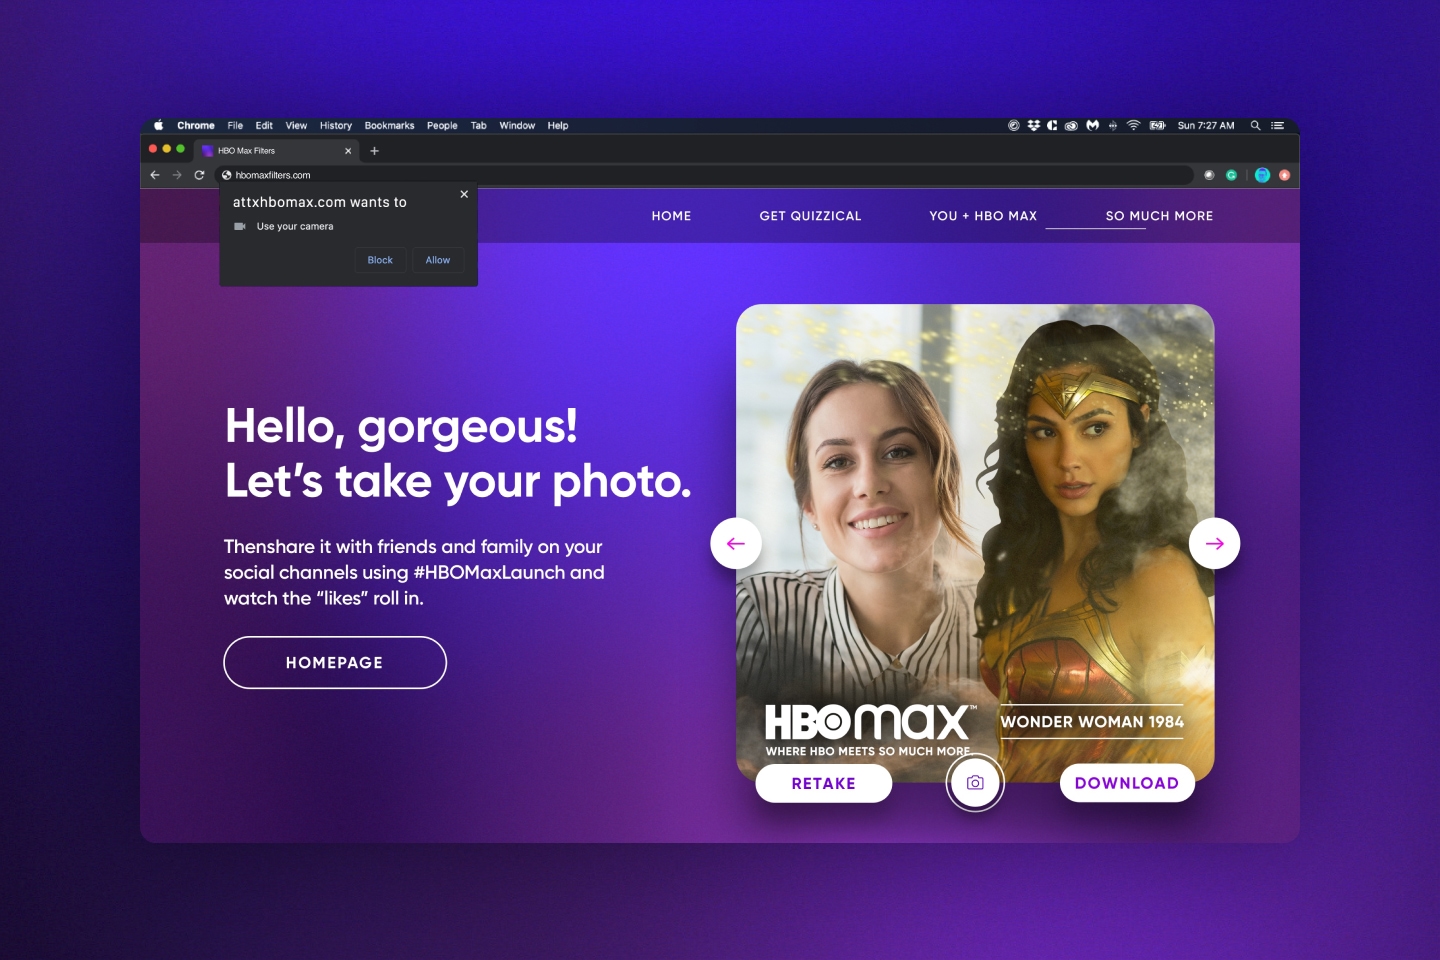 A screenshot of the HBO Max Desktop Photobooth